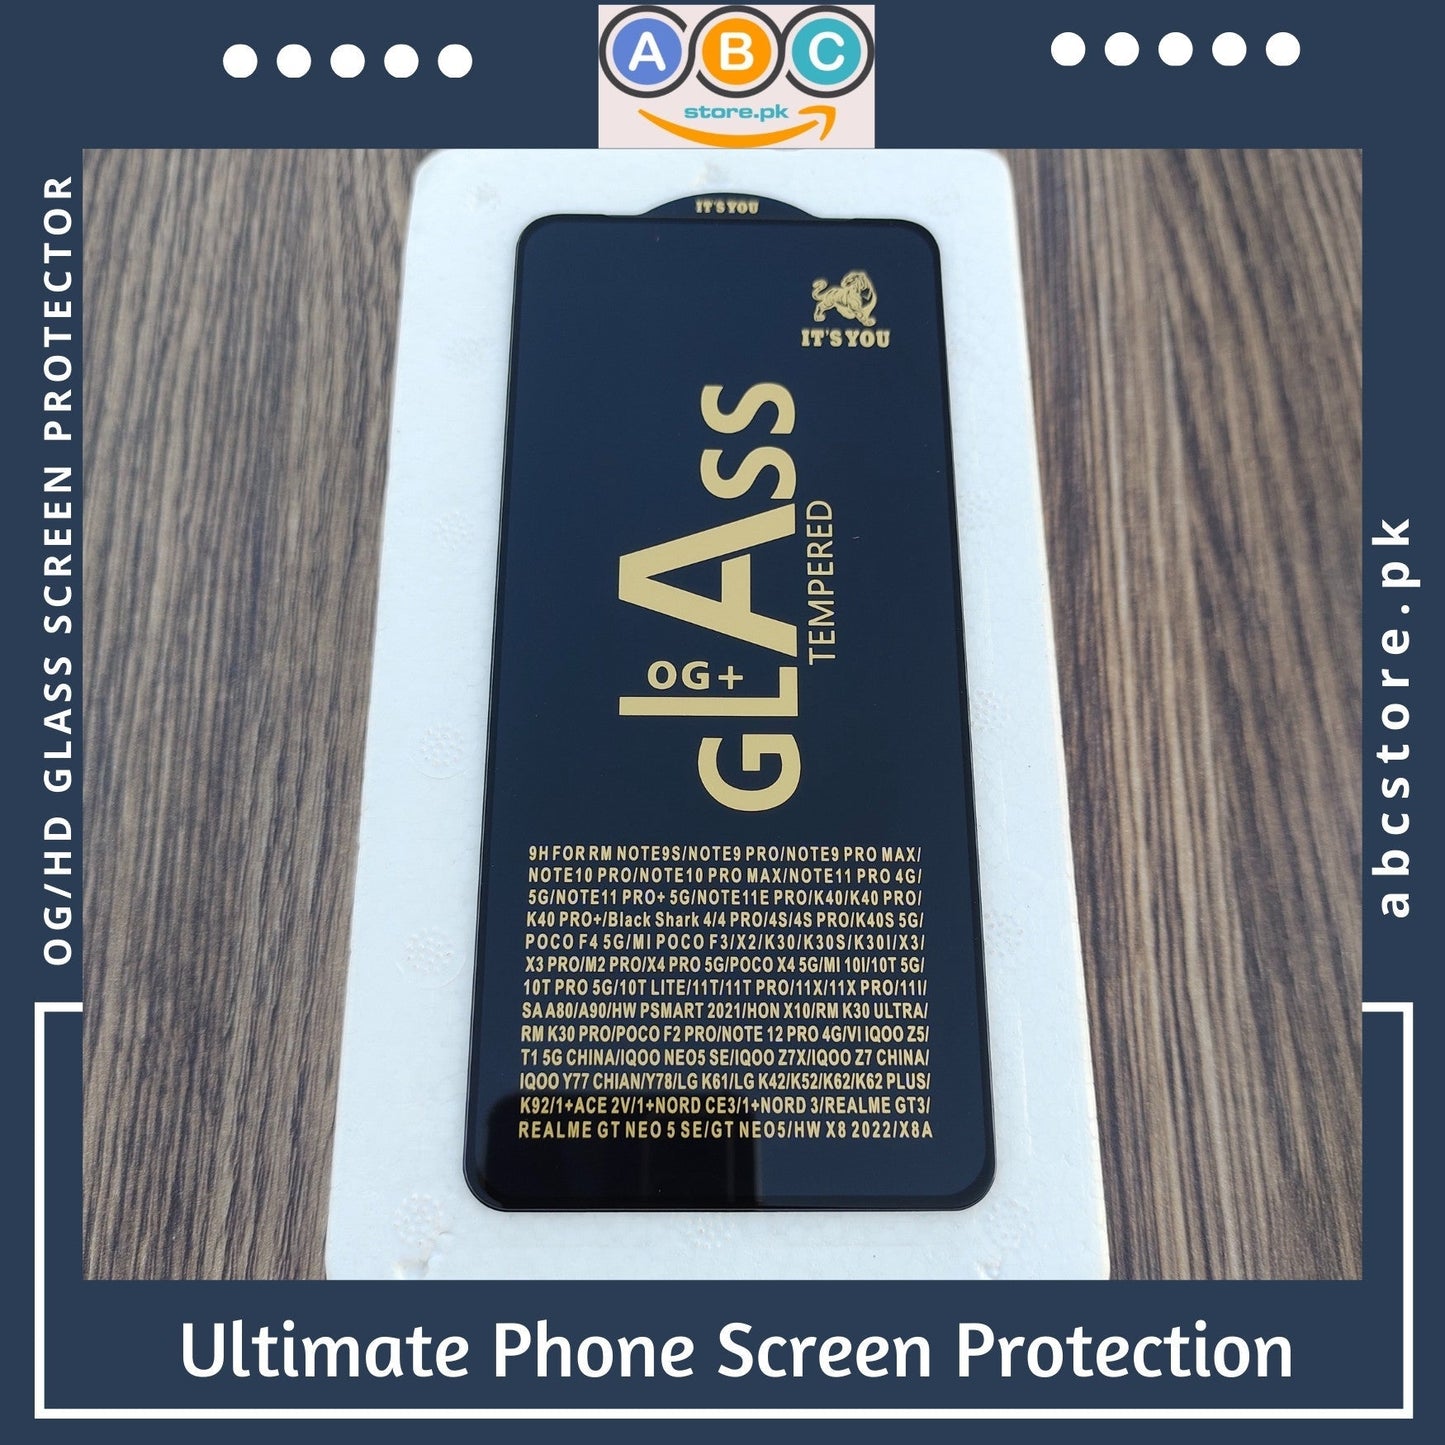 Vivo Y100, OG/HD Tempered Glass Screen Protector